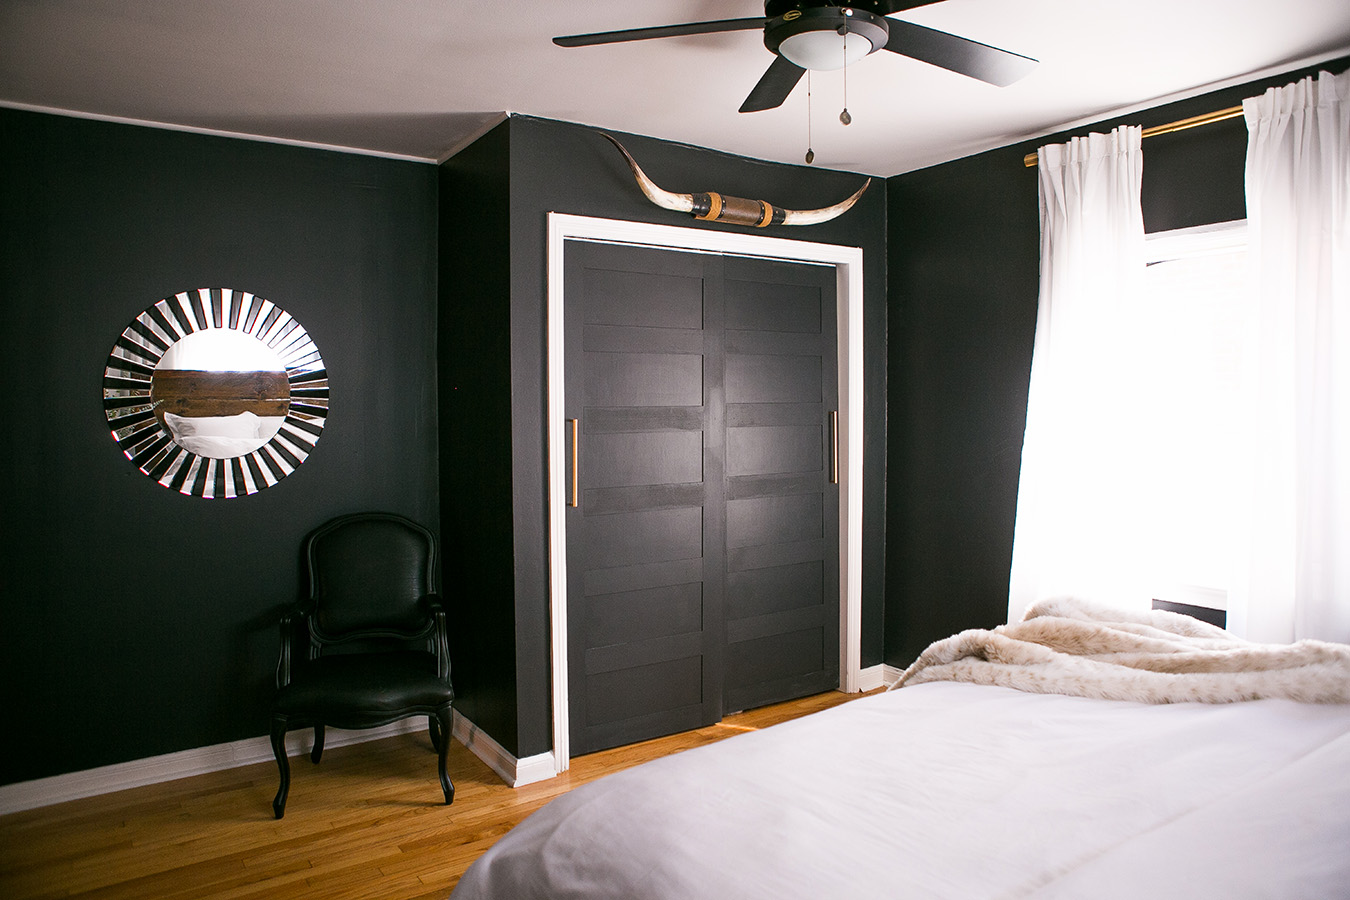 Create an affordable focal point with black and white